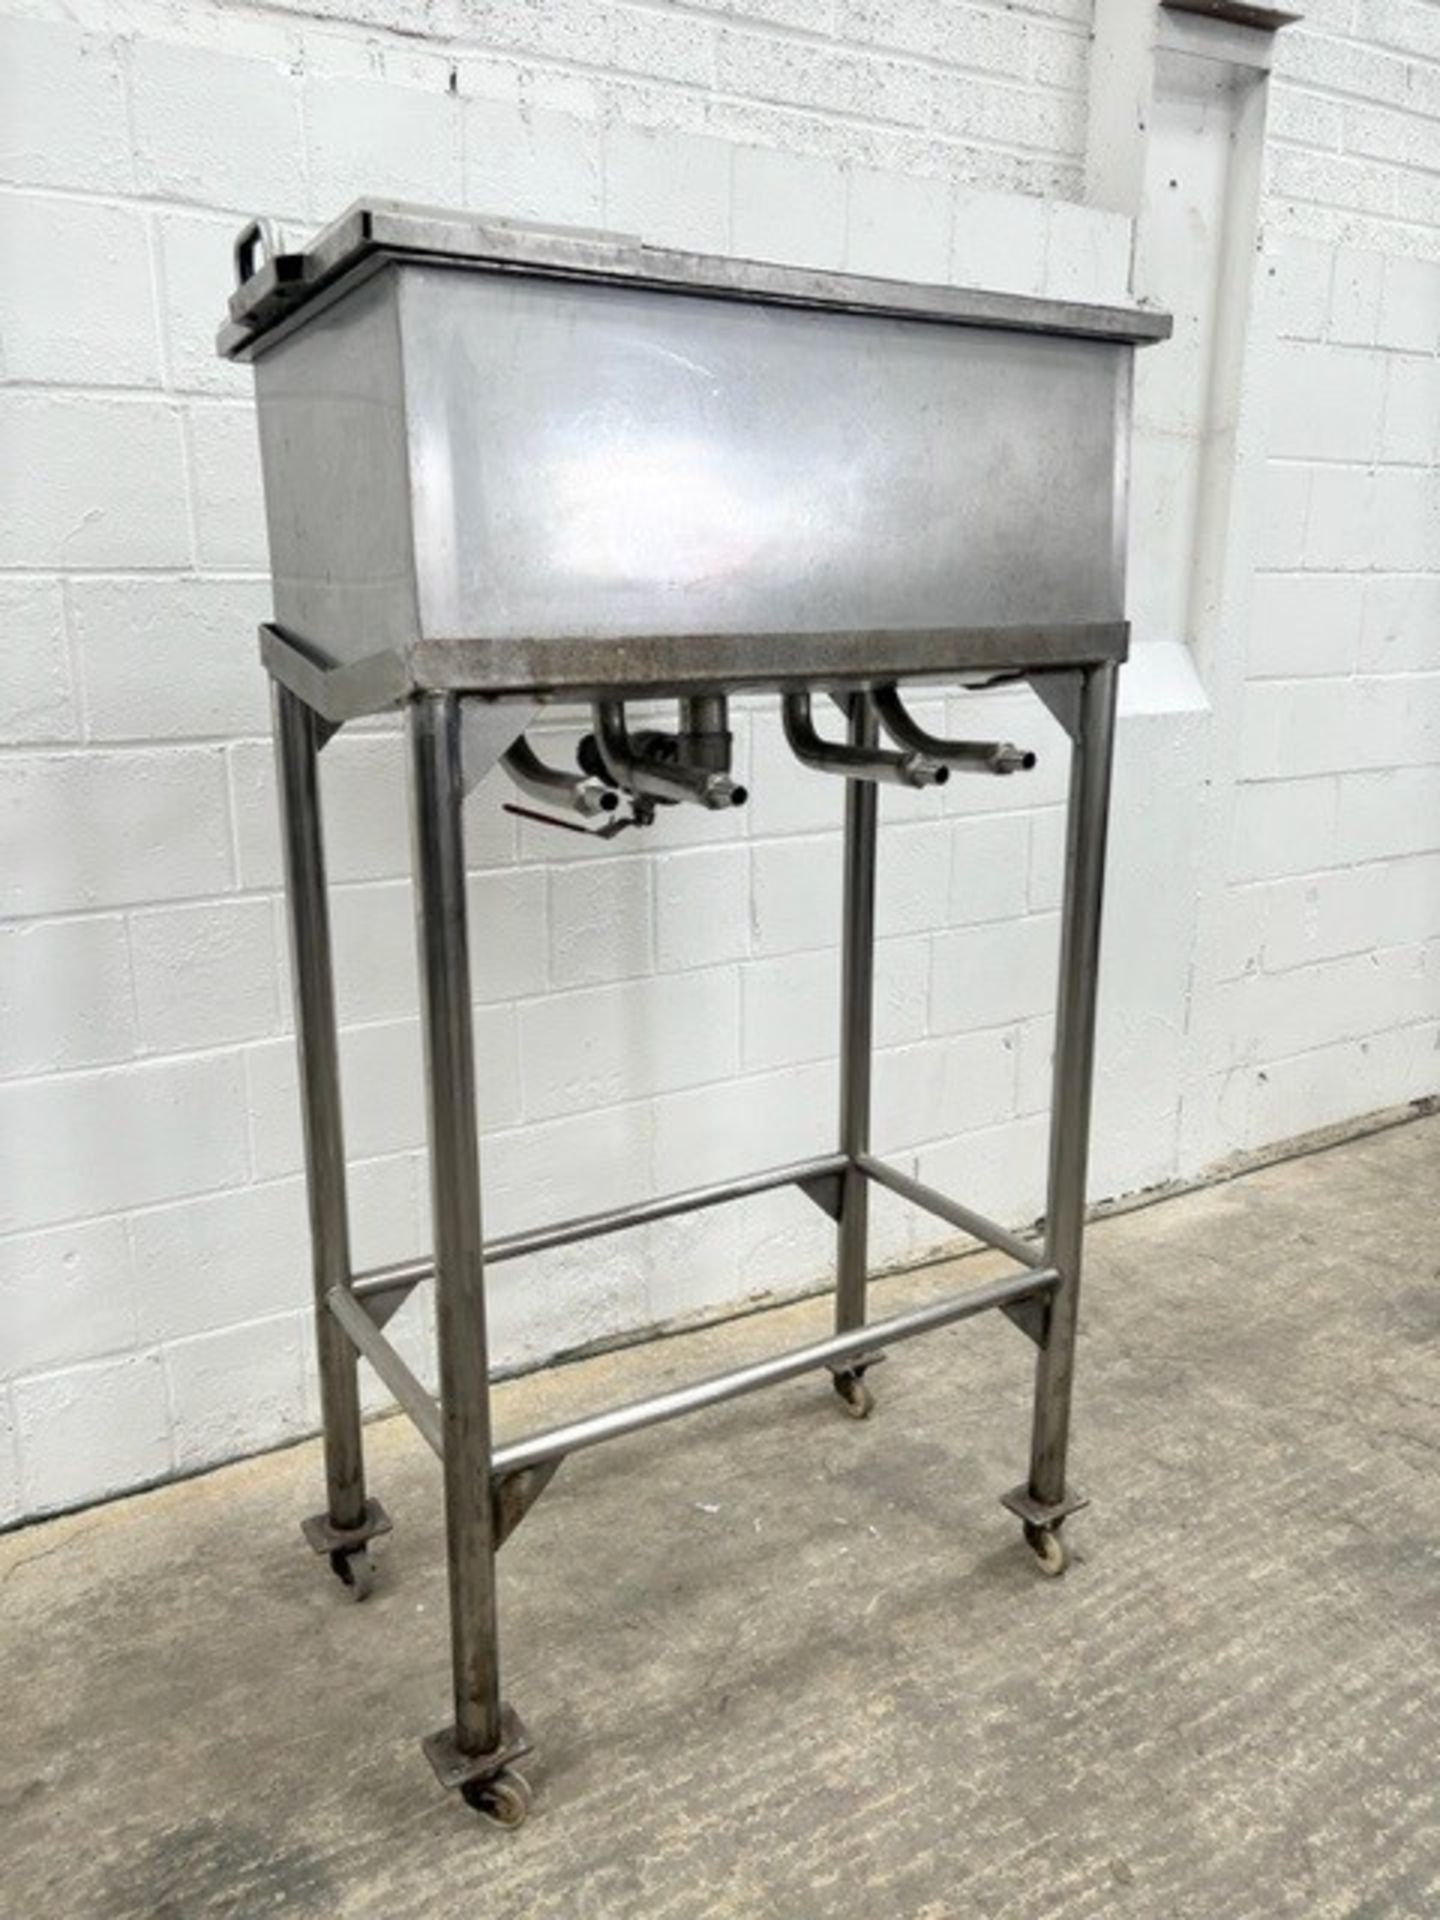 200L Stand Alone Mobile Header Storage Tank - Image 2 of 3